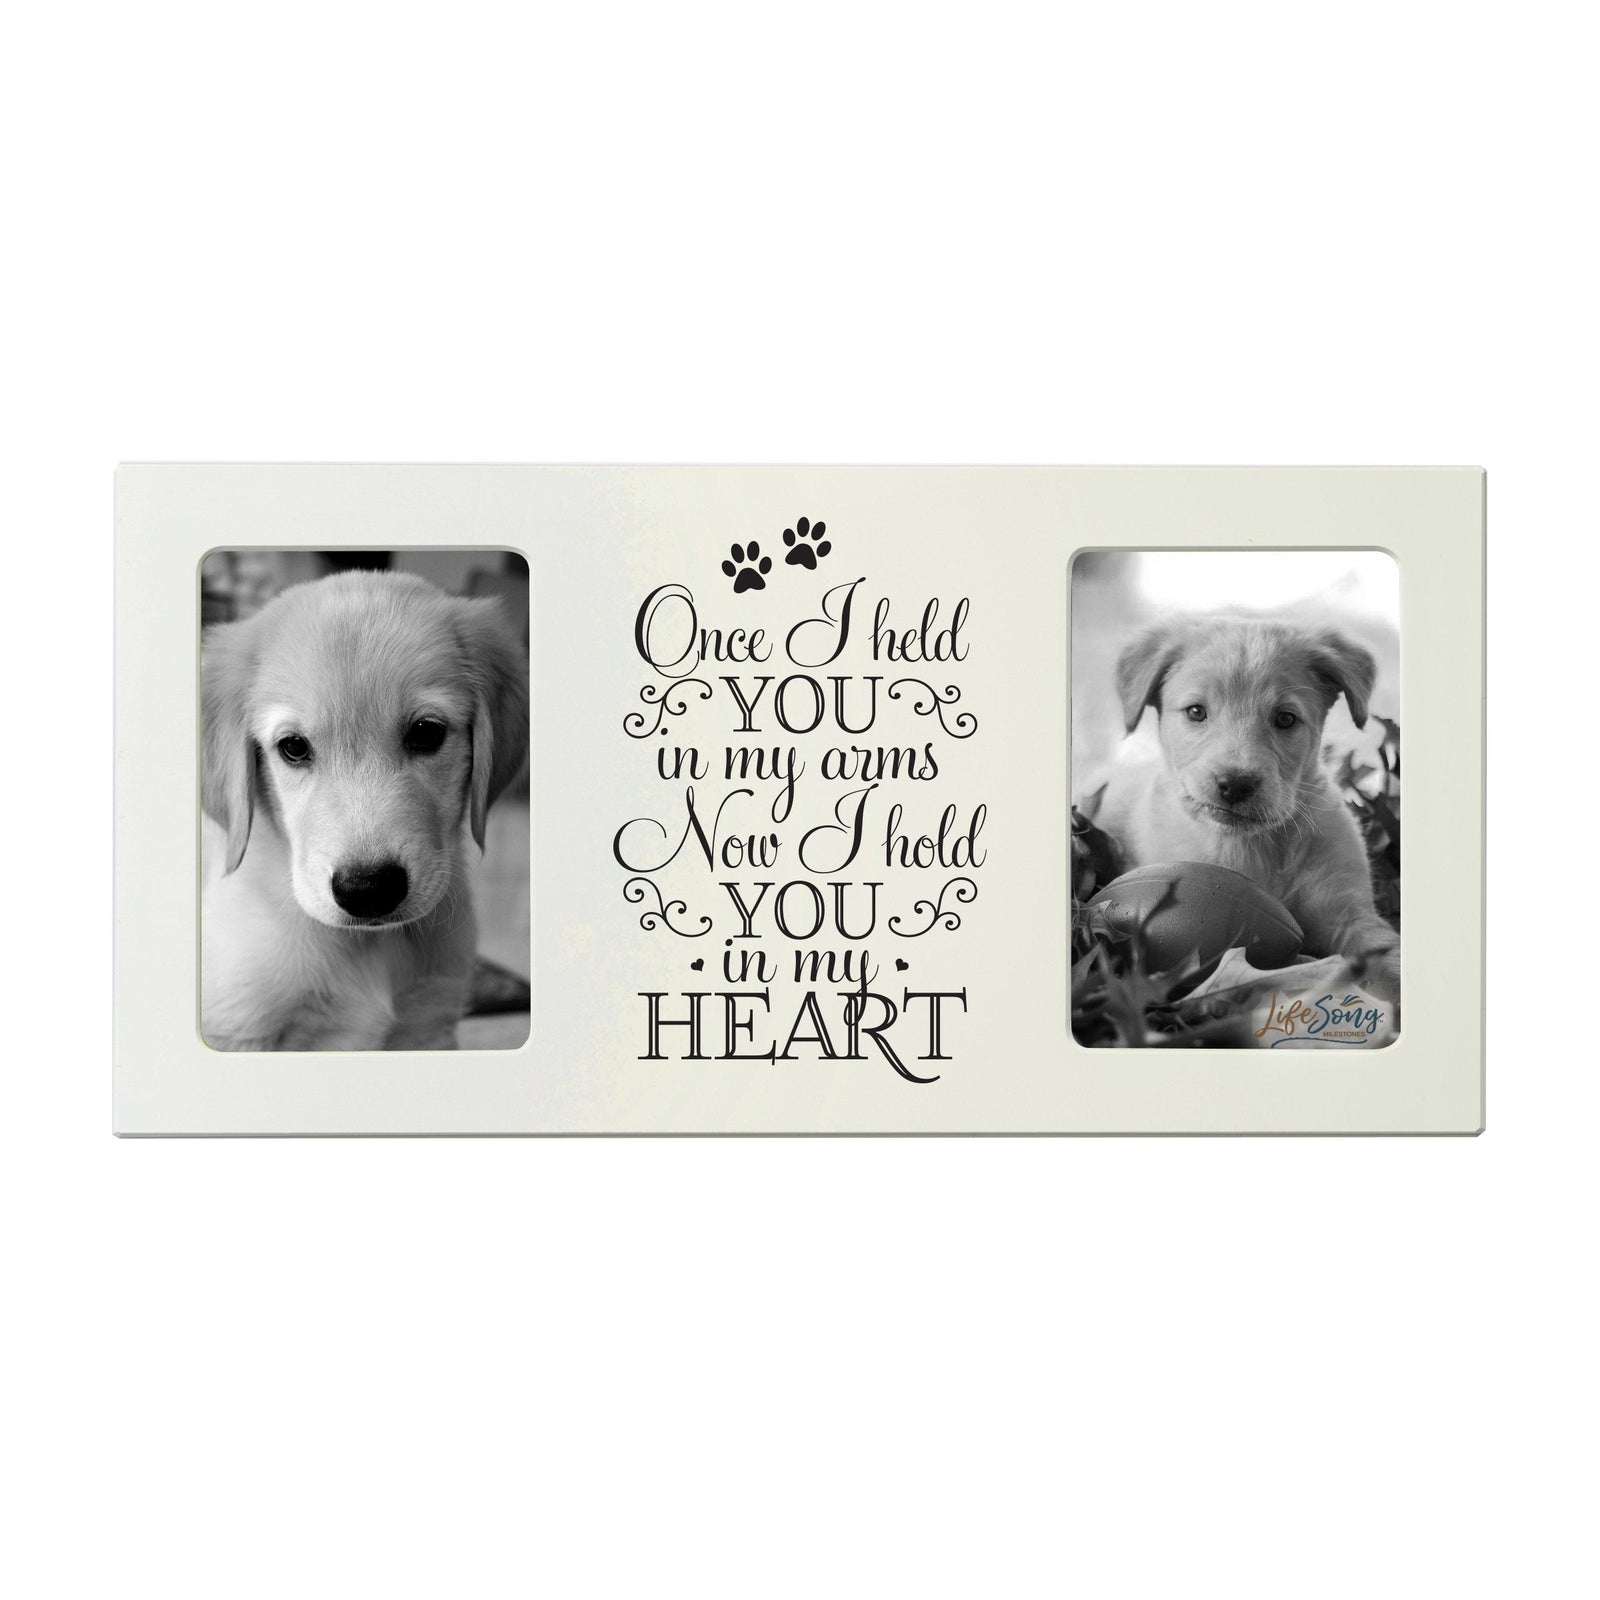 Ivory Pet Memorial Double 4x6 Picture Frame with phrase "Once I Held You"